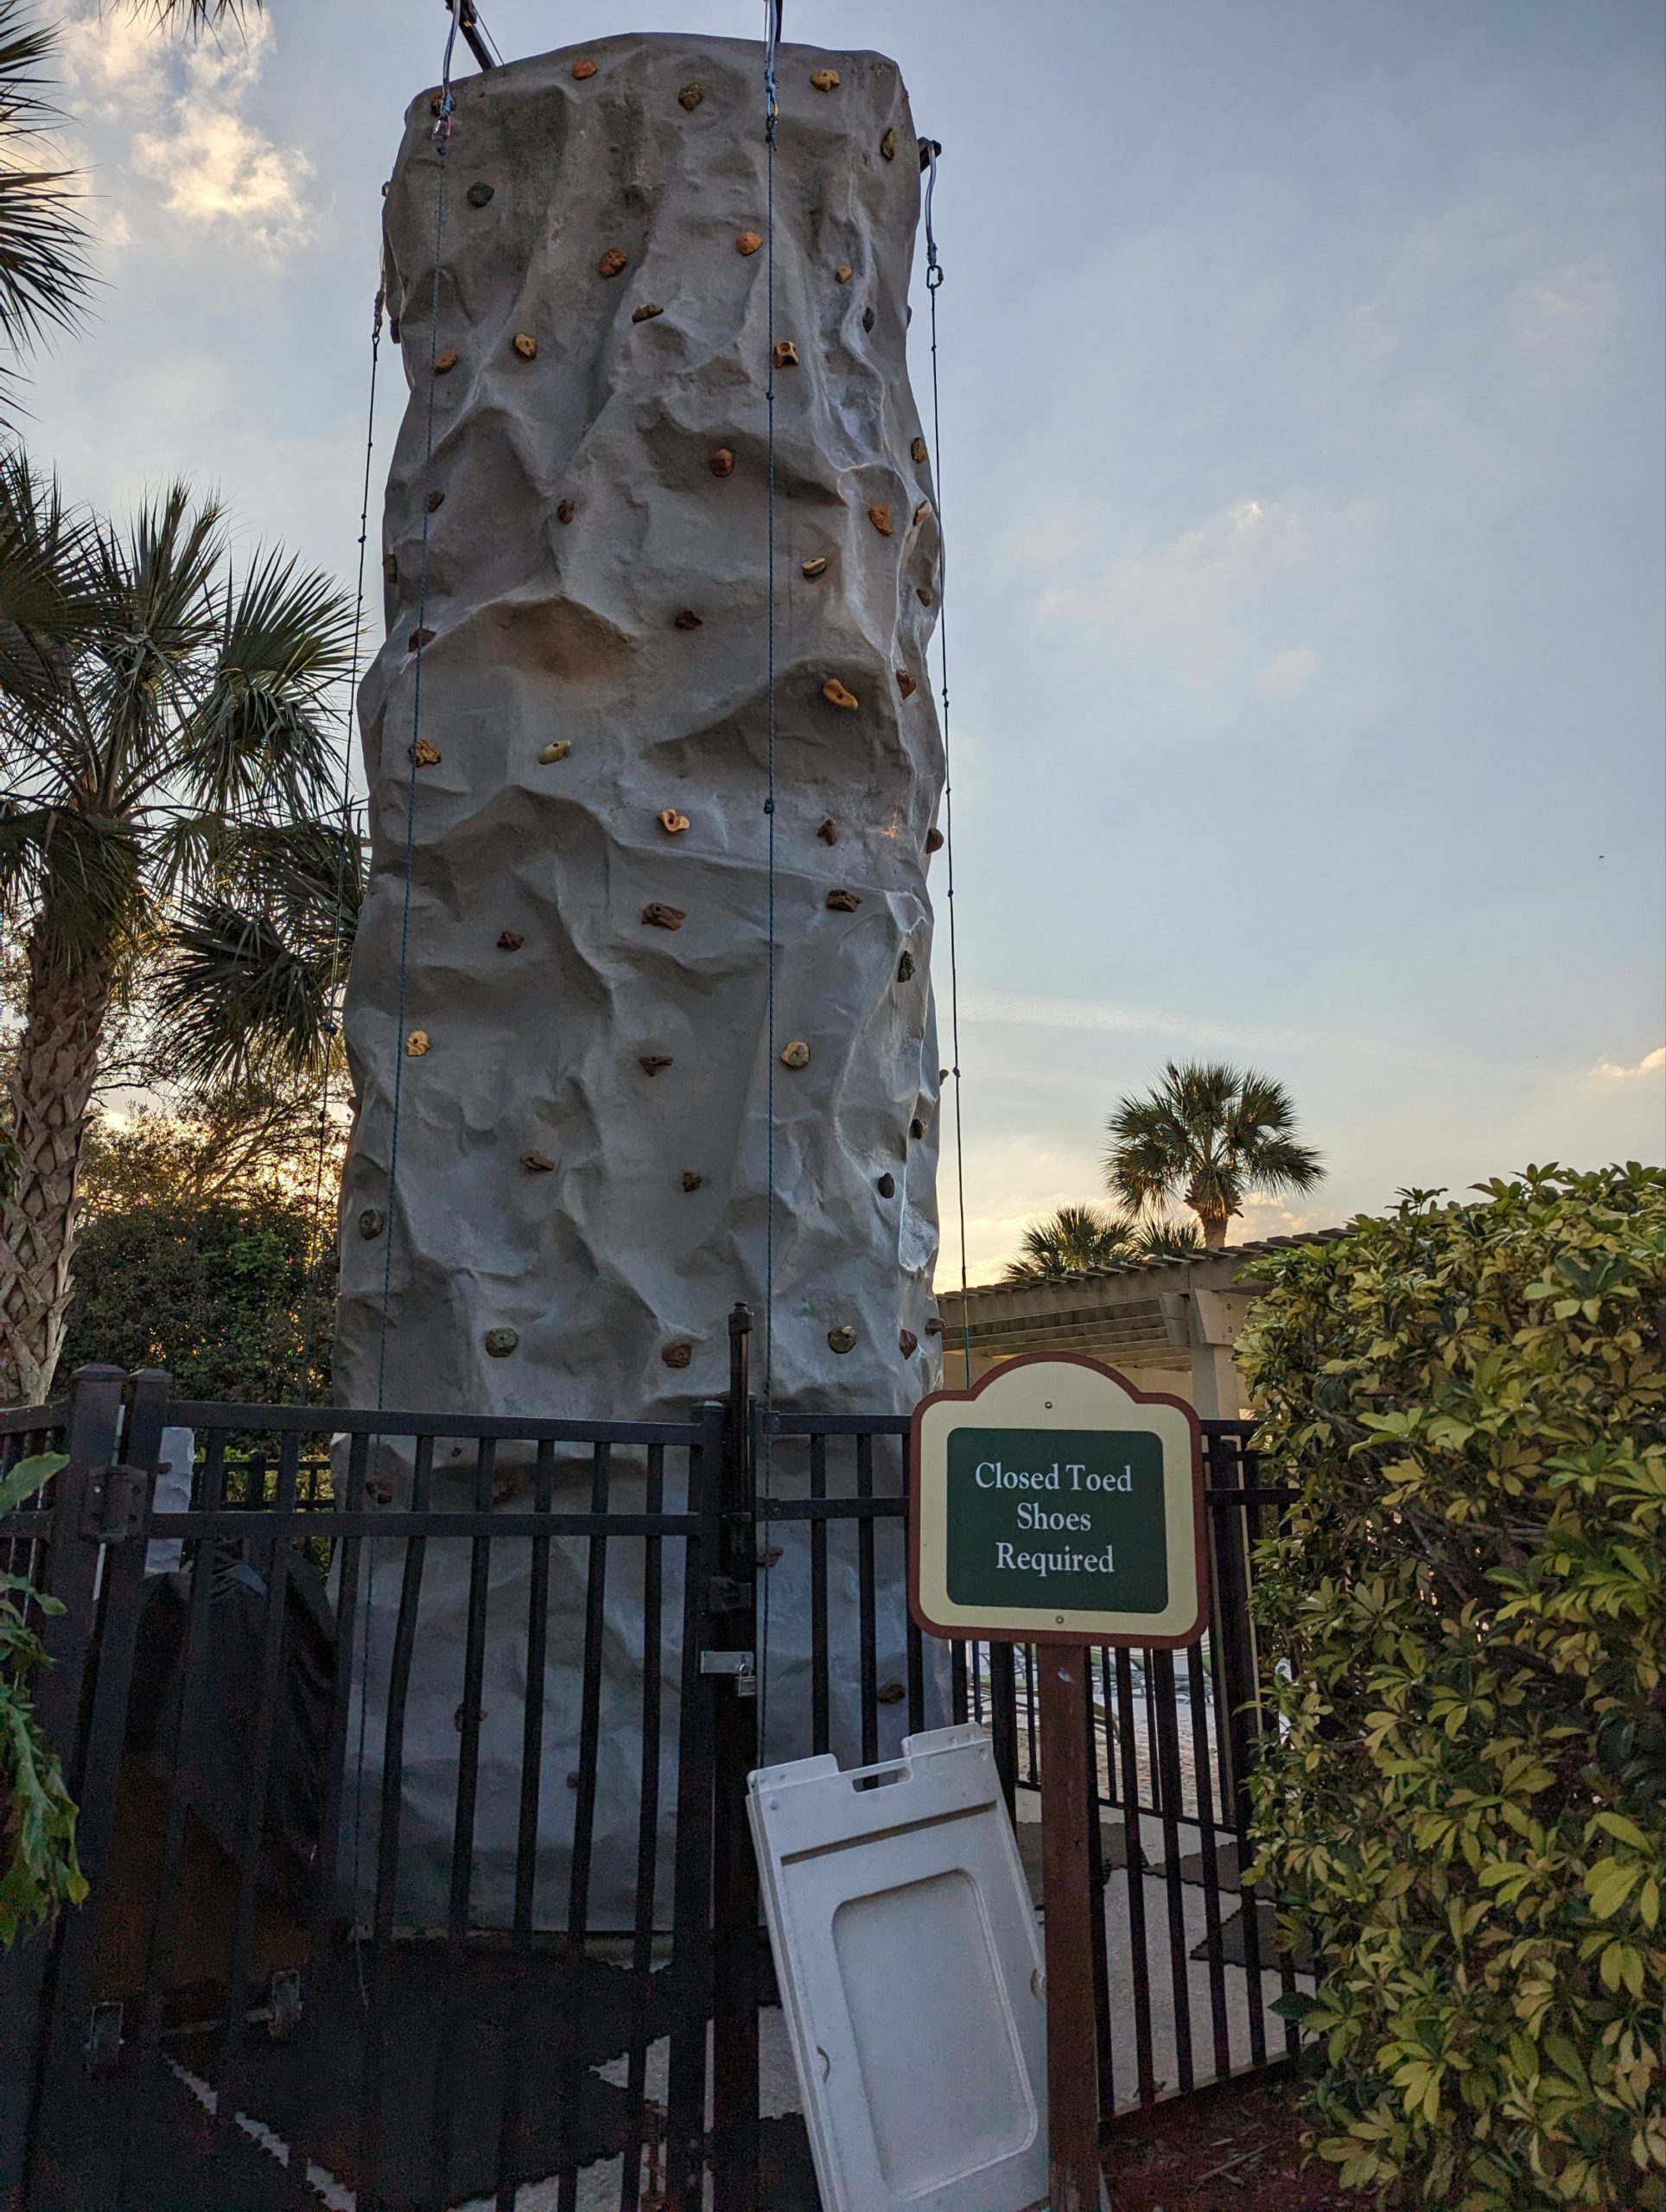 a rock climbing tower in front of a gate